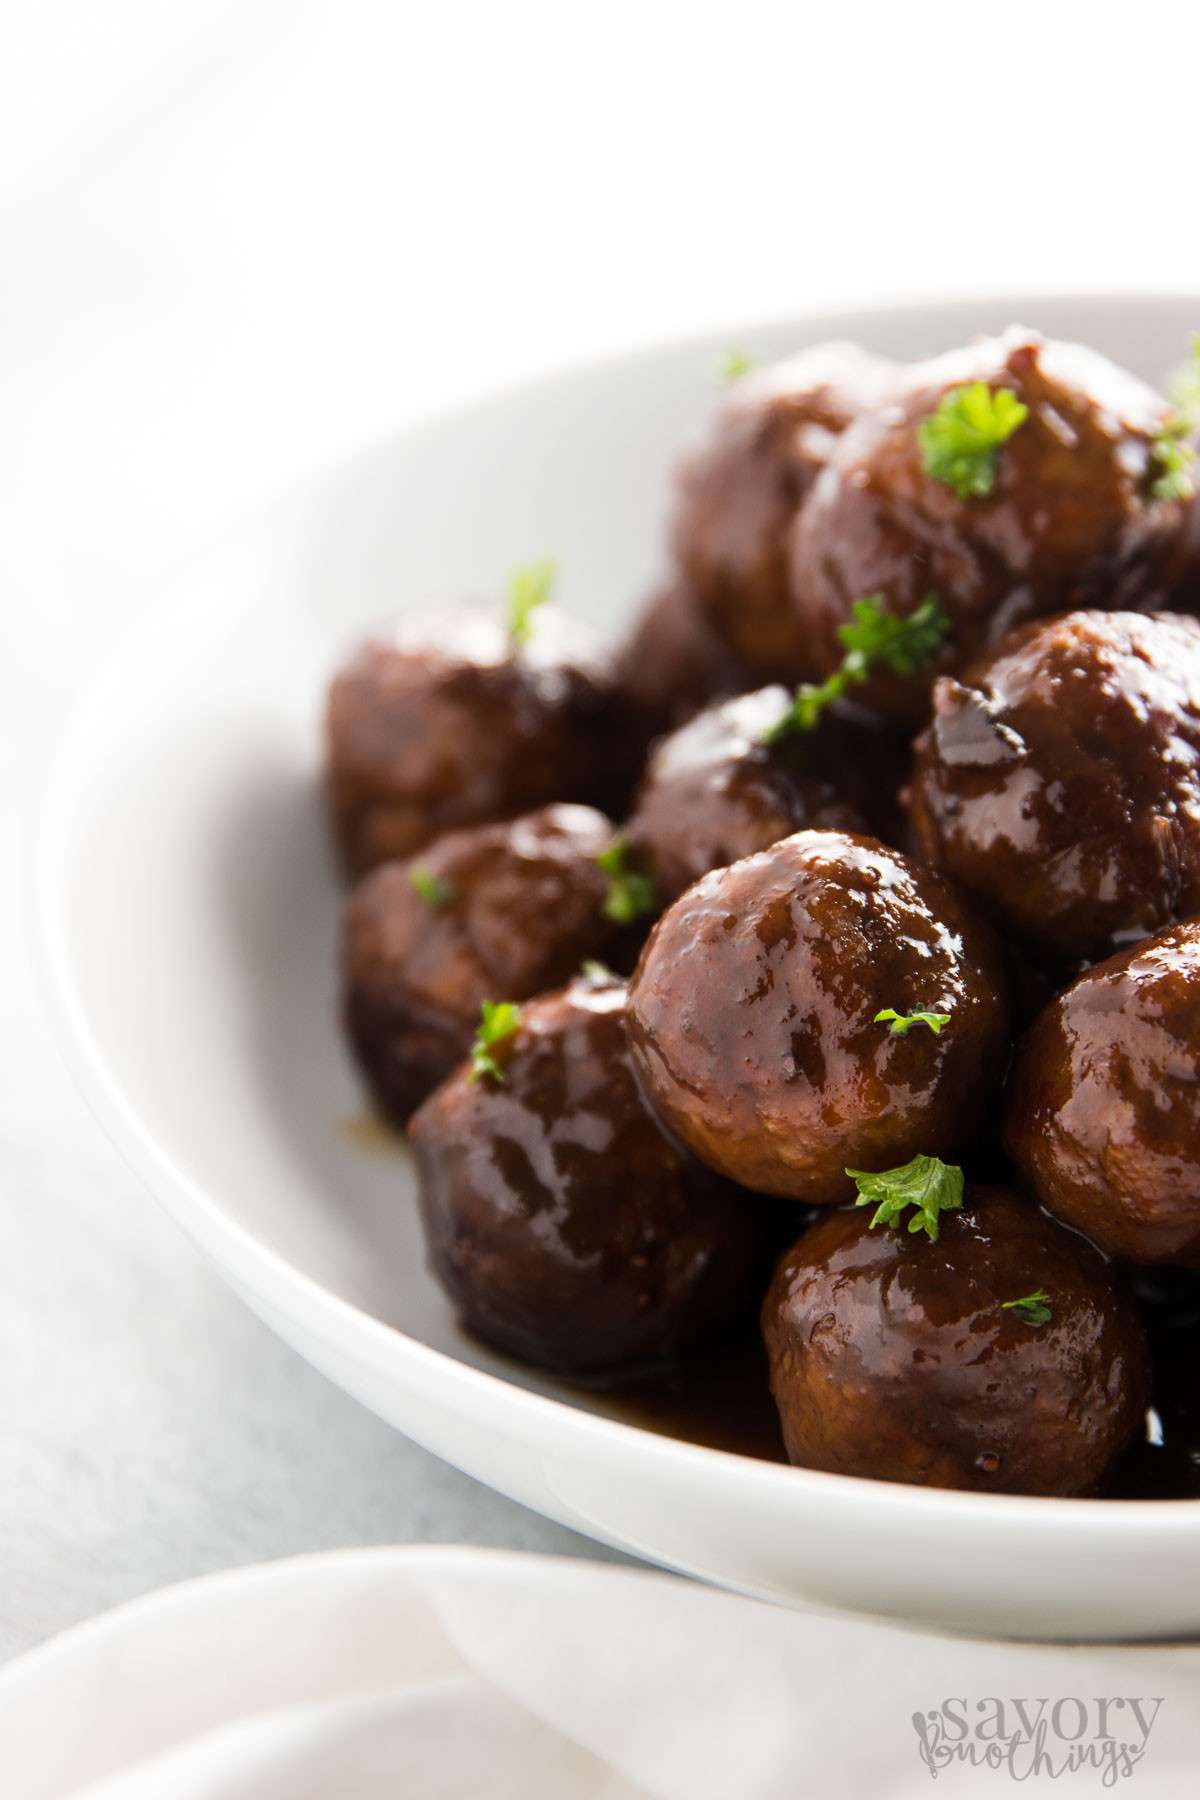 Healthy 5 Ingredient Slow Cooker Recipes
 Crockpot Turkey Meatballs with Cranberry Glaze Easy